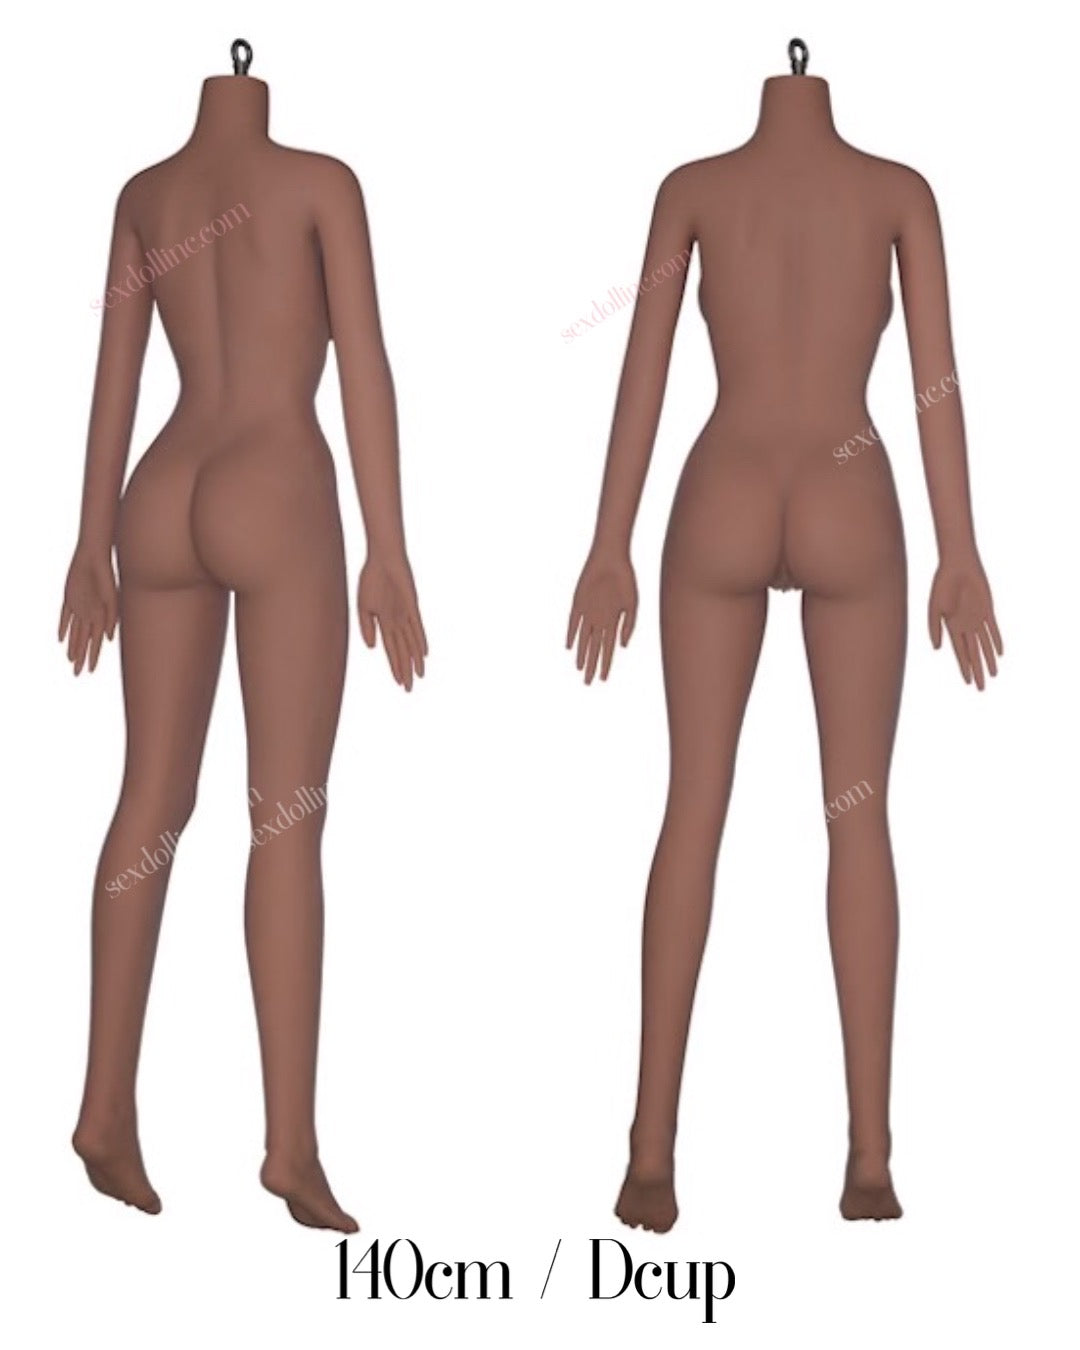 Customize your Sex Doll - Petite, 140cm / Dcup